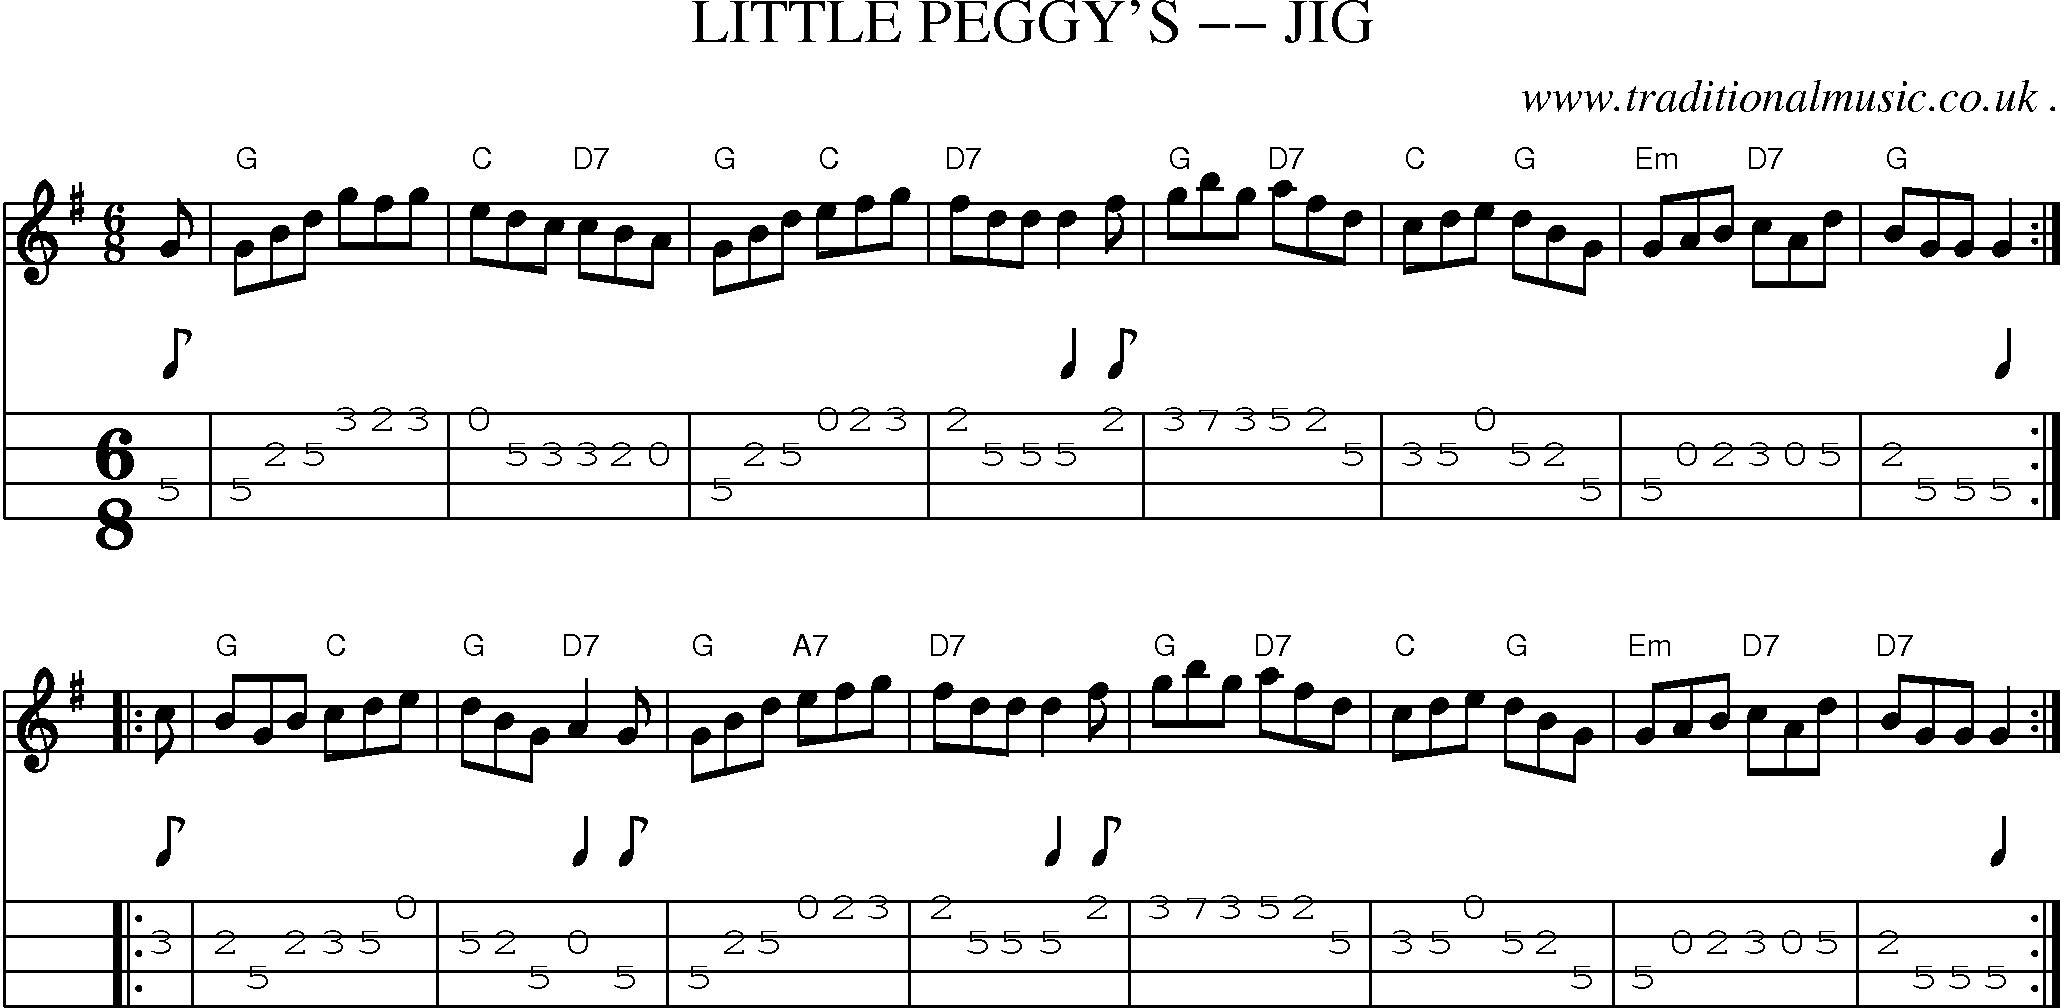 Sheet-music  score, Chords and Mandolin Tabs for Little Peggys -- Jig